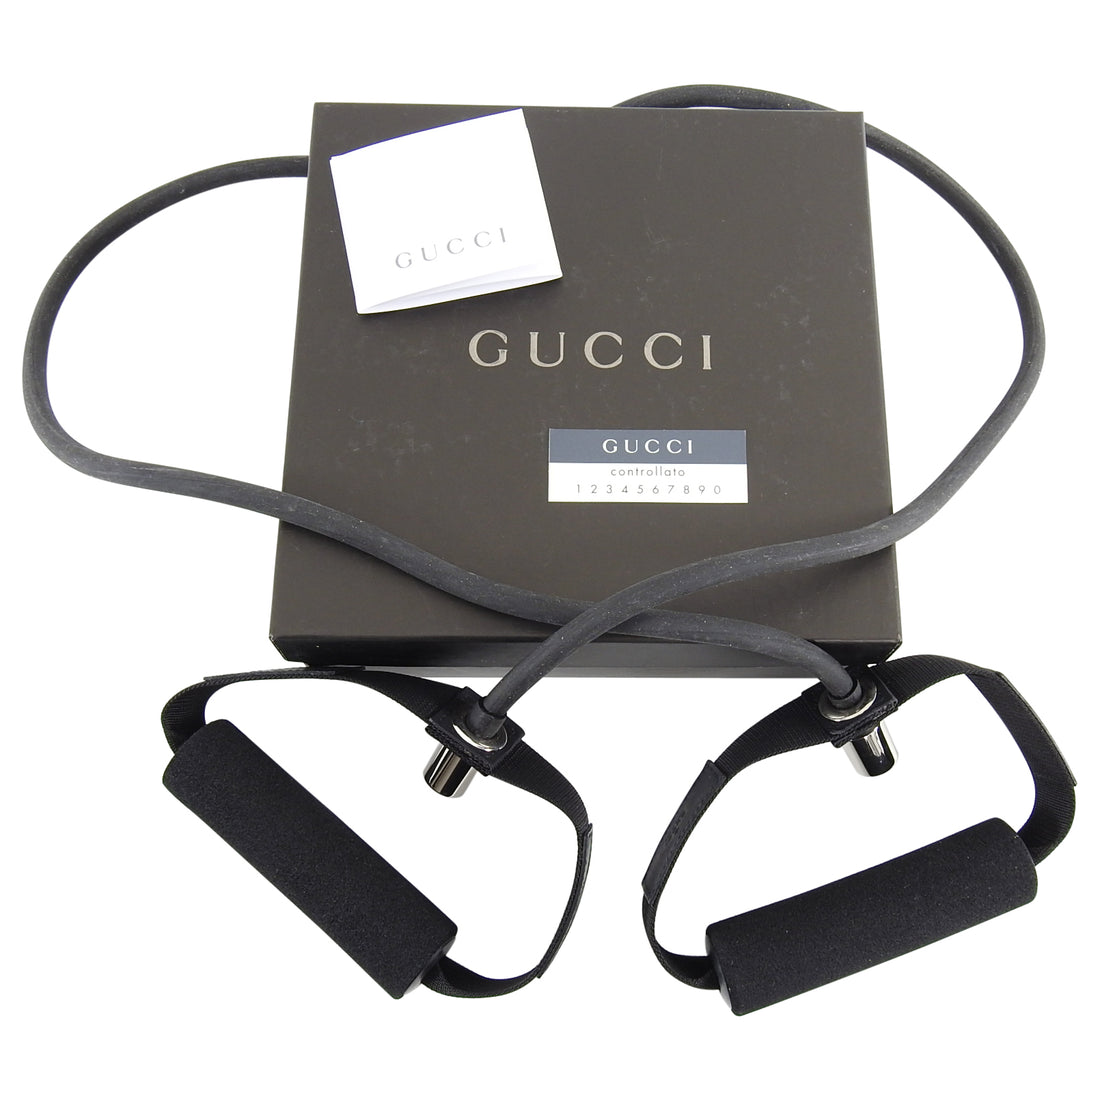 Gucci Tom Ford Exercise Resistance Work Out Band - Long